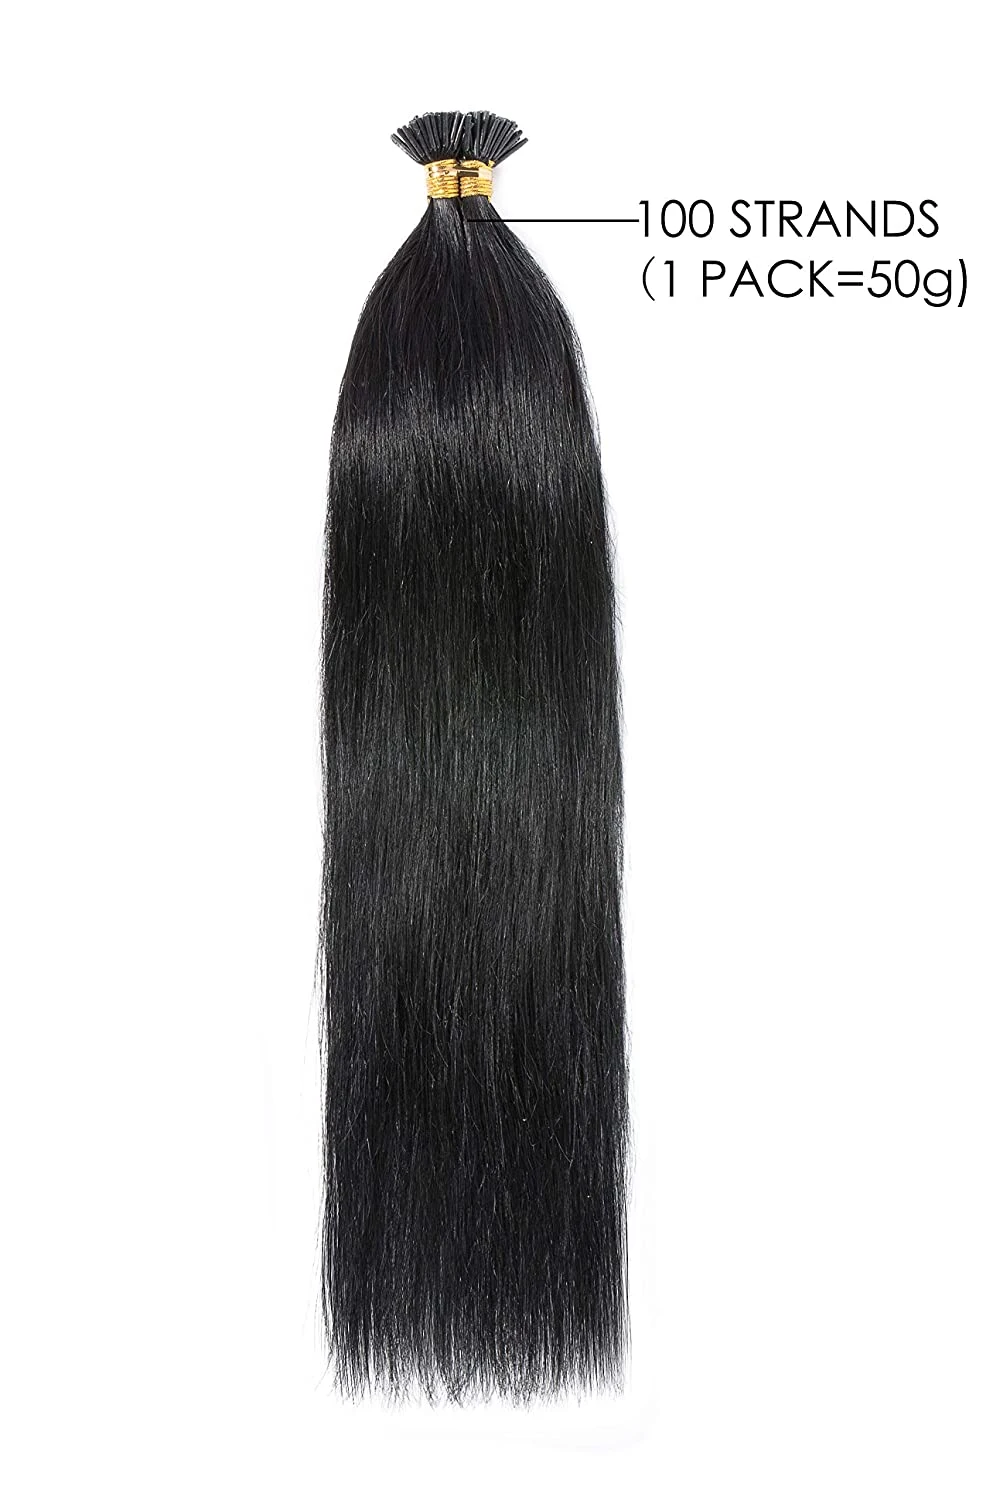 I Tip Hair Extensions Human Hair Pre Bonded 22Inch #1 Jet Black Silky Straight Hair Extensions Keratin with Salon Style 100% Real Human Hair(Keratin, 50G, 1G/S)